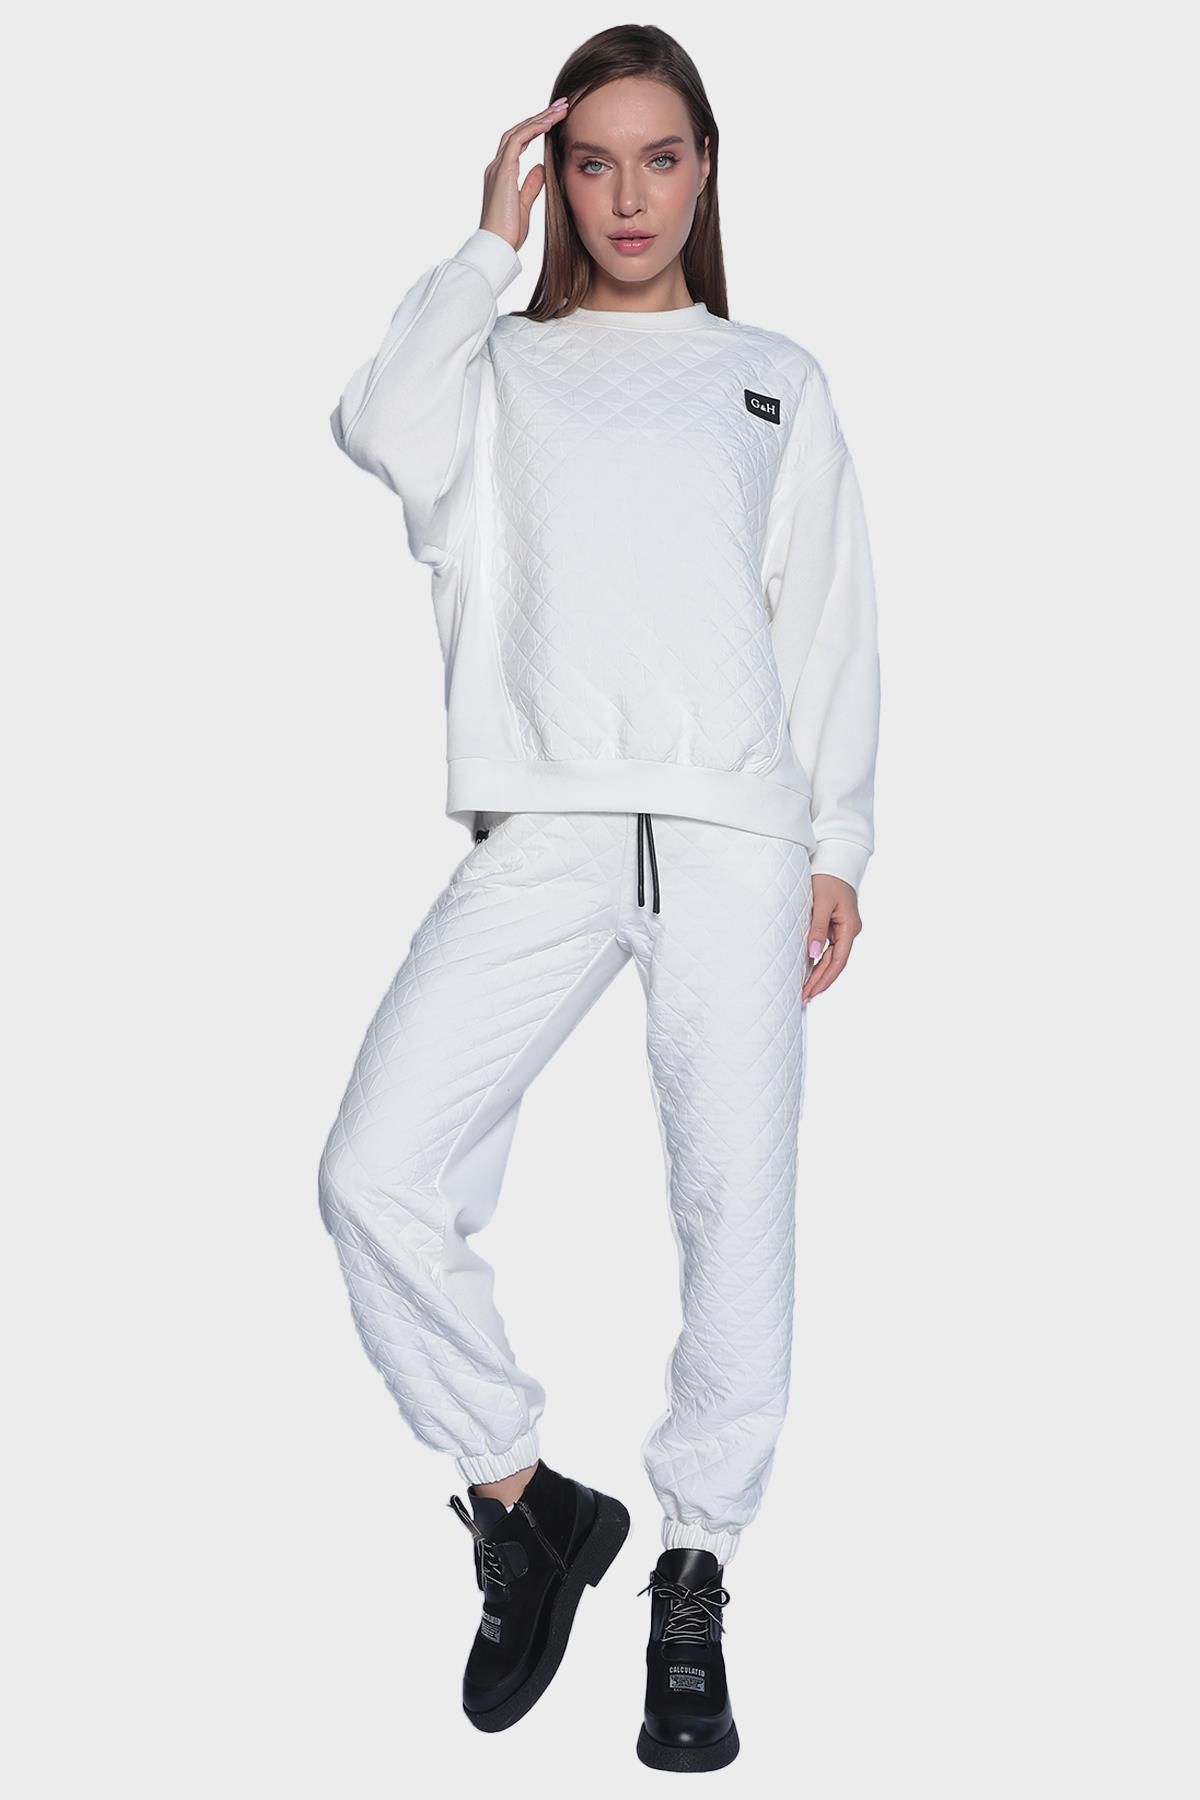 Womens Sports Style Quilted Sweatshirt and Sweatpants Set - White